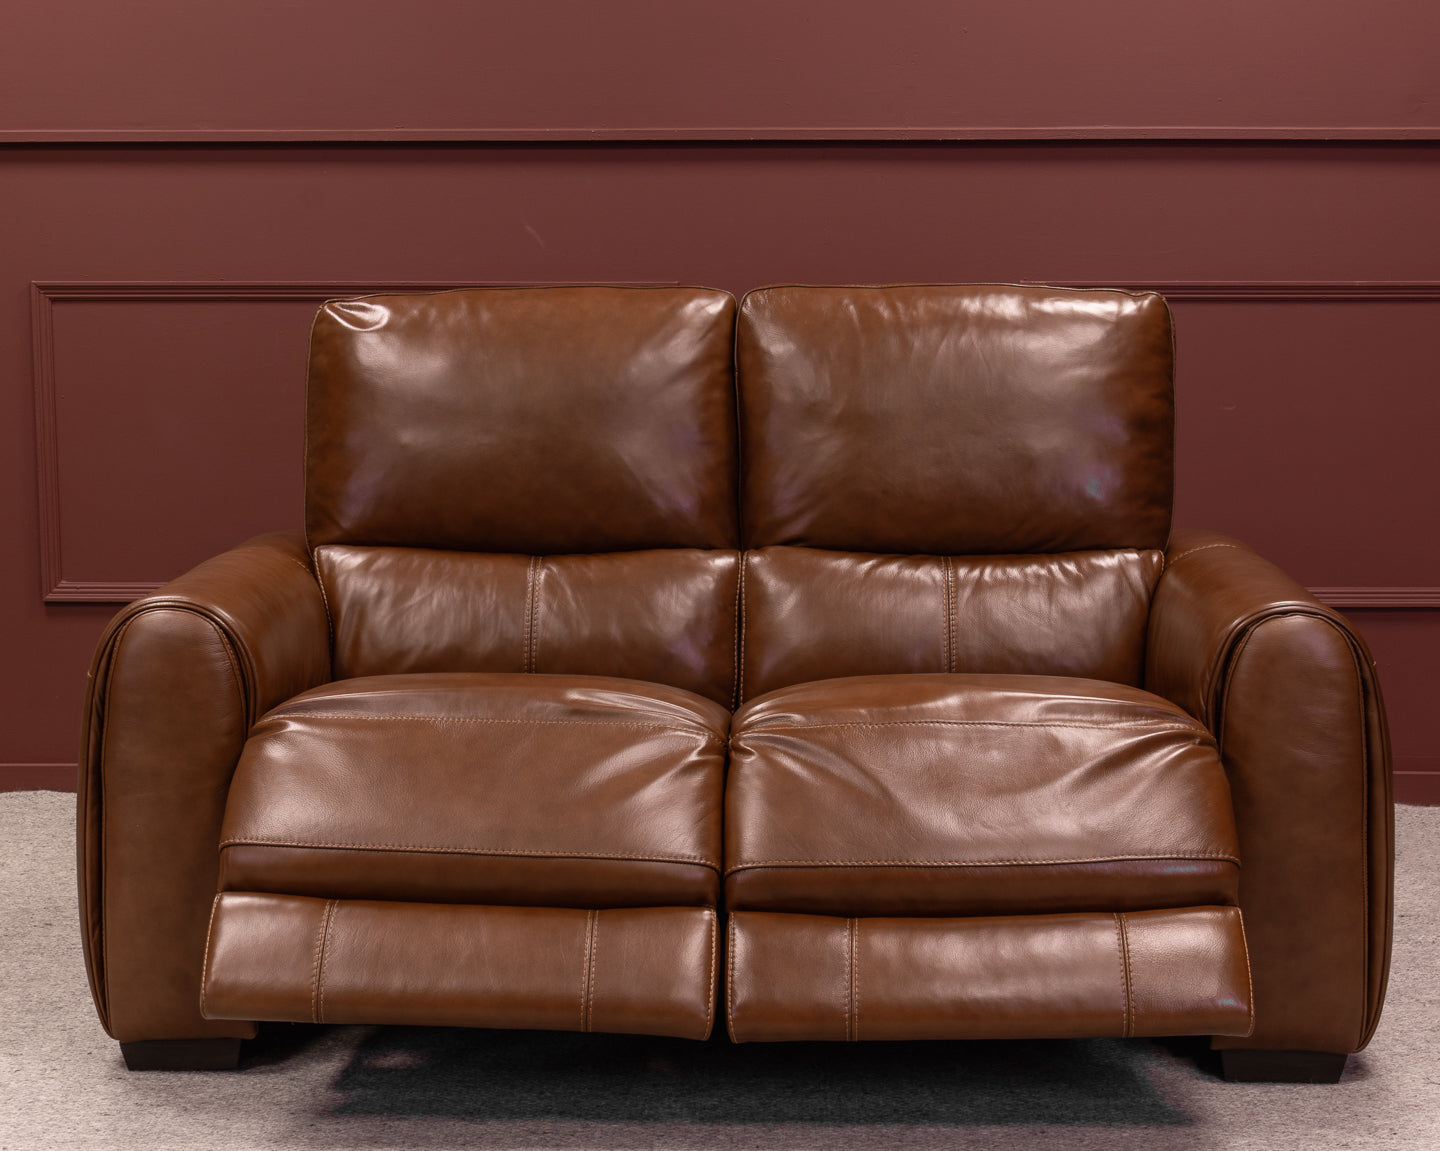 Athena 2 Seater Powered Recliner - Leather